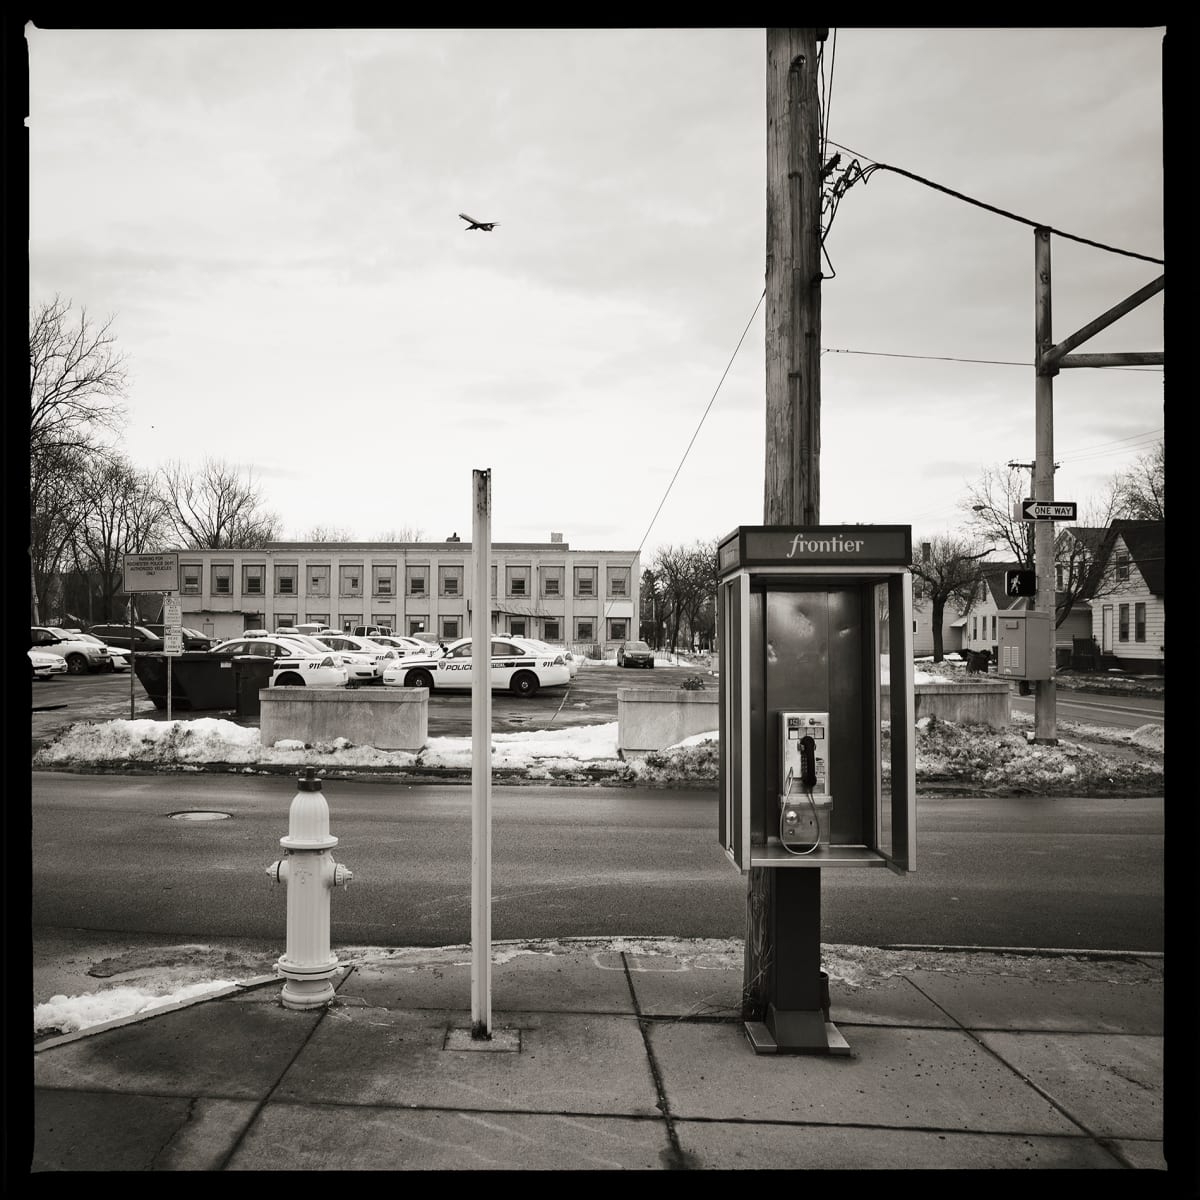 585.235.9493 – Rochester Police Department, 261 Child Street, Rochester, NY 14611 by Eric T. Kunsman  Image: ID: A black and white image shows the Rochester police station from across the street.  There are many cop cars in front of the building.  On this side of the road is a payphone next to a telephone pole.  There is a bird flying in the frame as well.